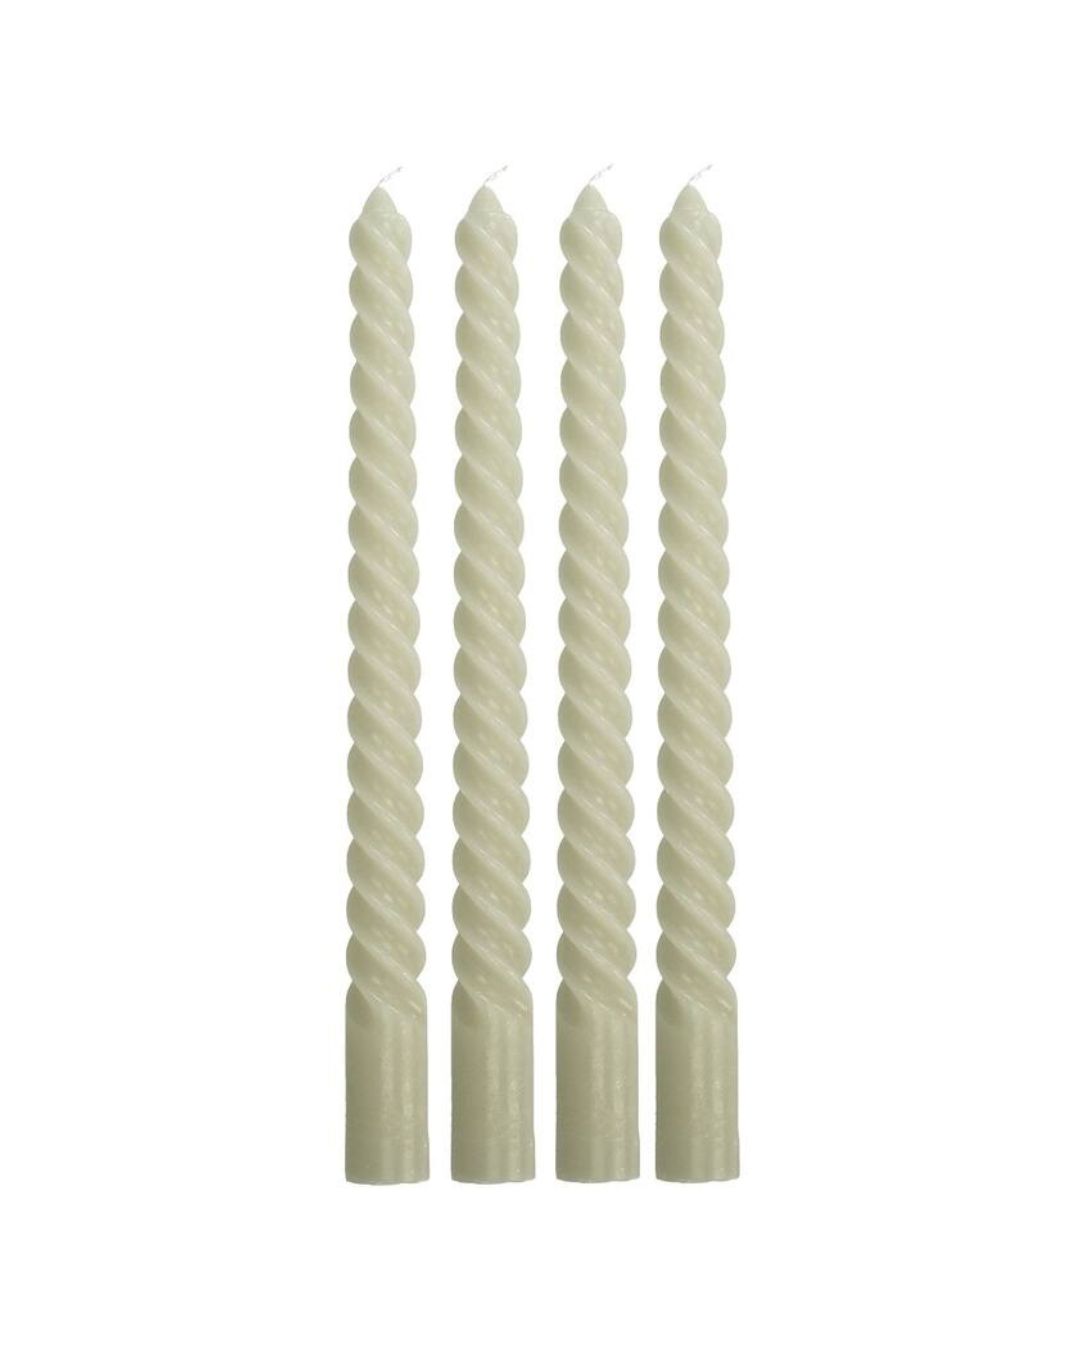 Twisted Candles - Ivory (Box of 4)